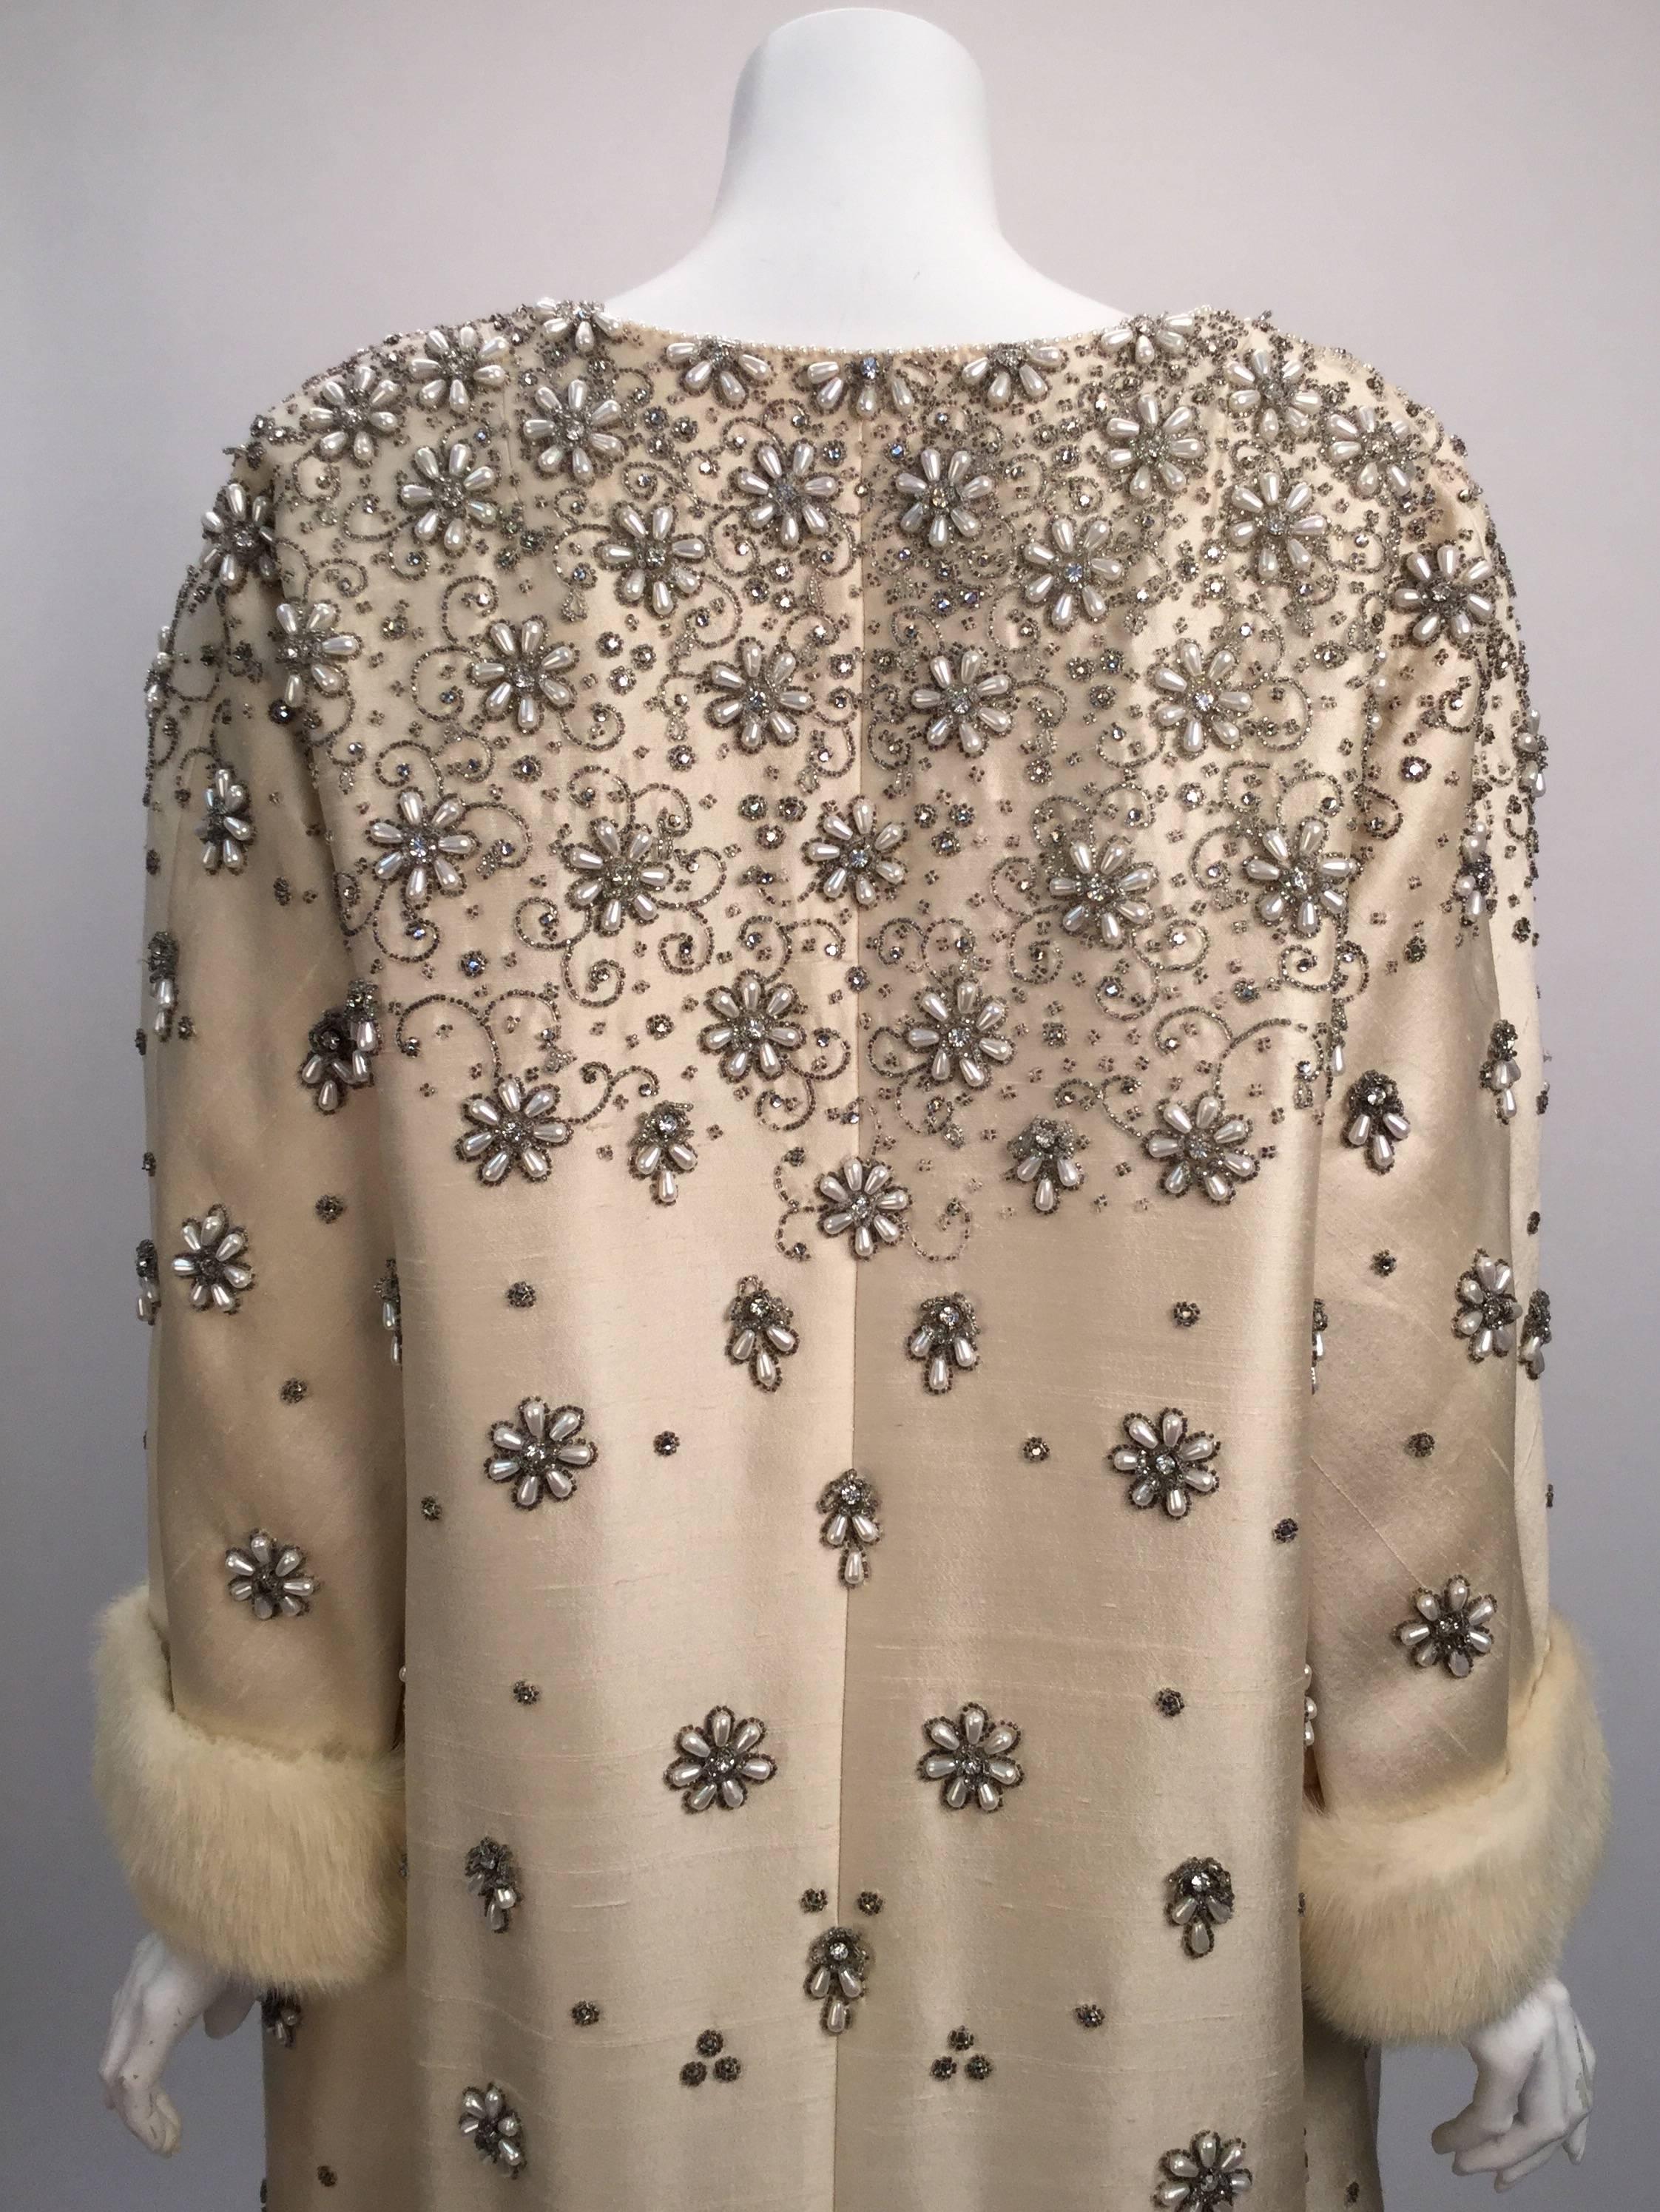 Unbelievable 1960's Victoria Royal Ltd. ivory embellished dress ensemble!

Dress is artistically detailed in rhinestones and pearlized beads in the form of flowers.  The top of this sleeveless dress features heavier beading and floral patterns at